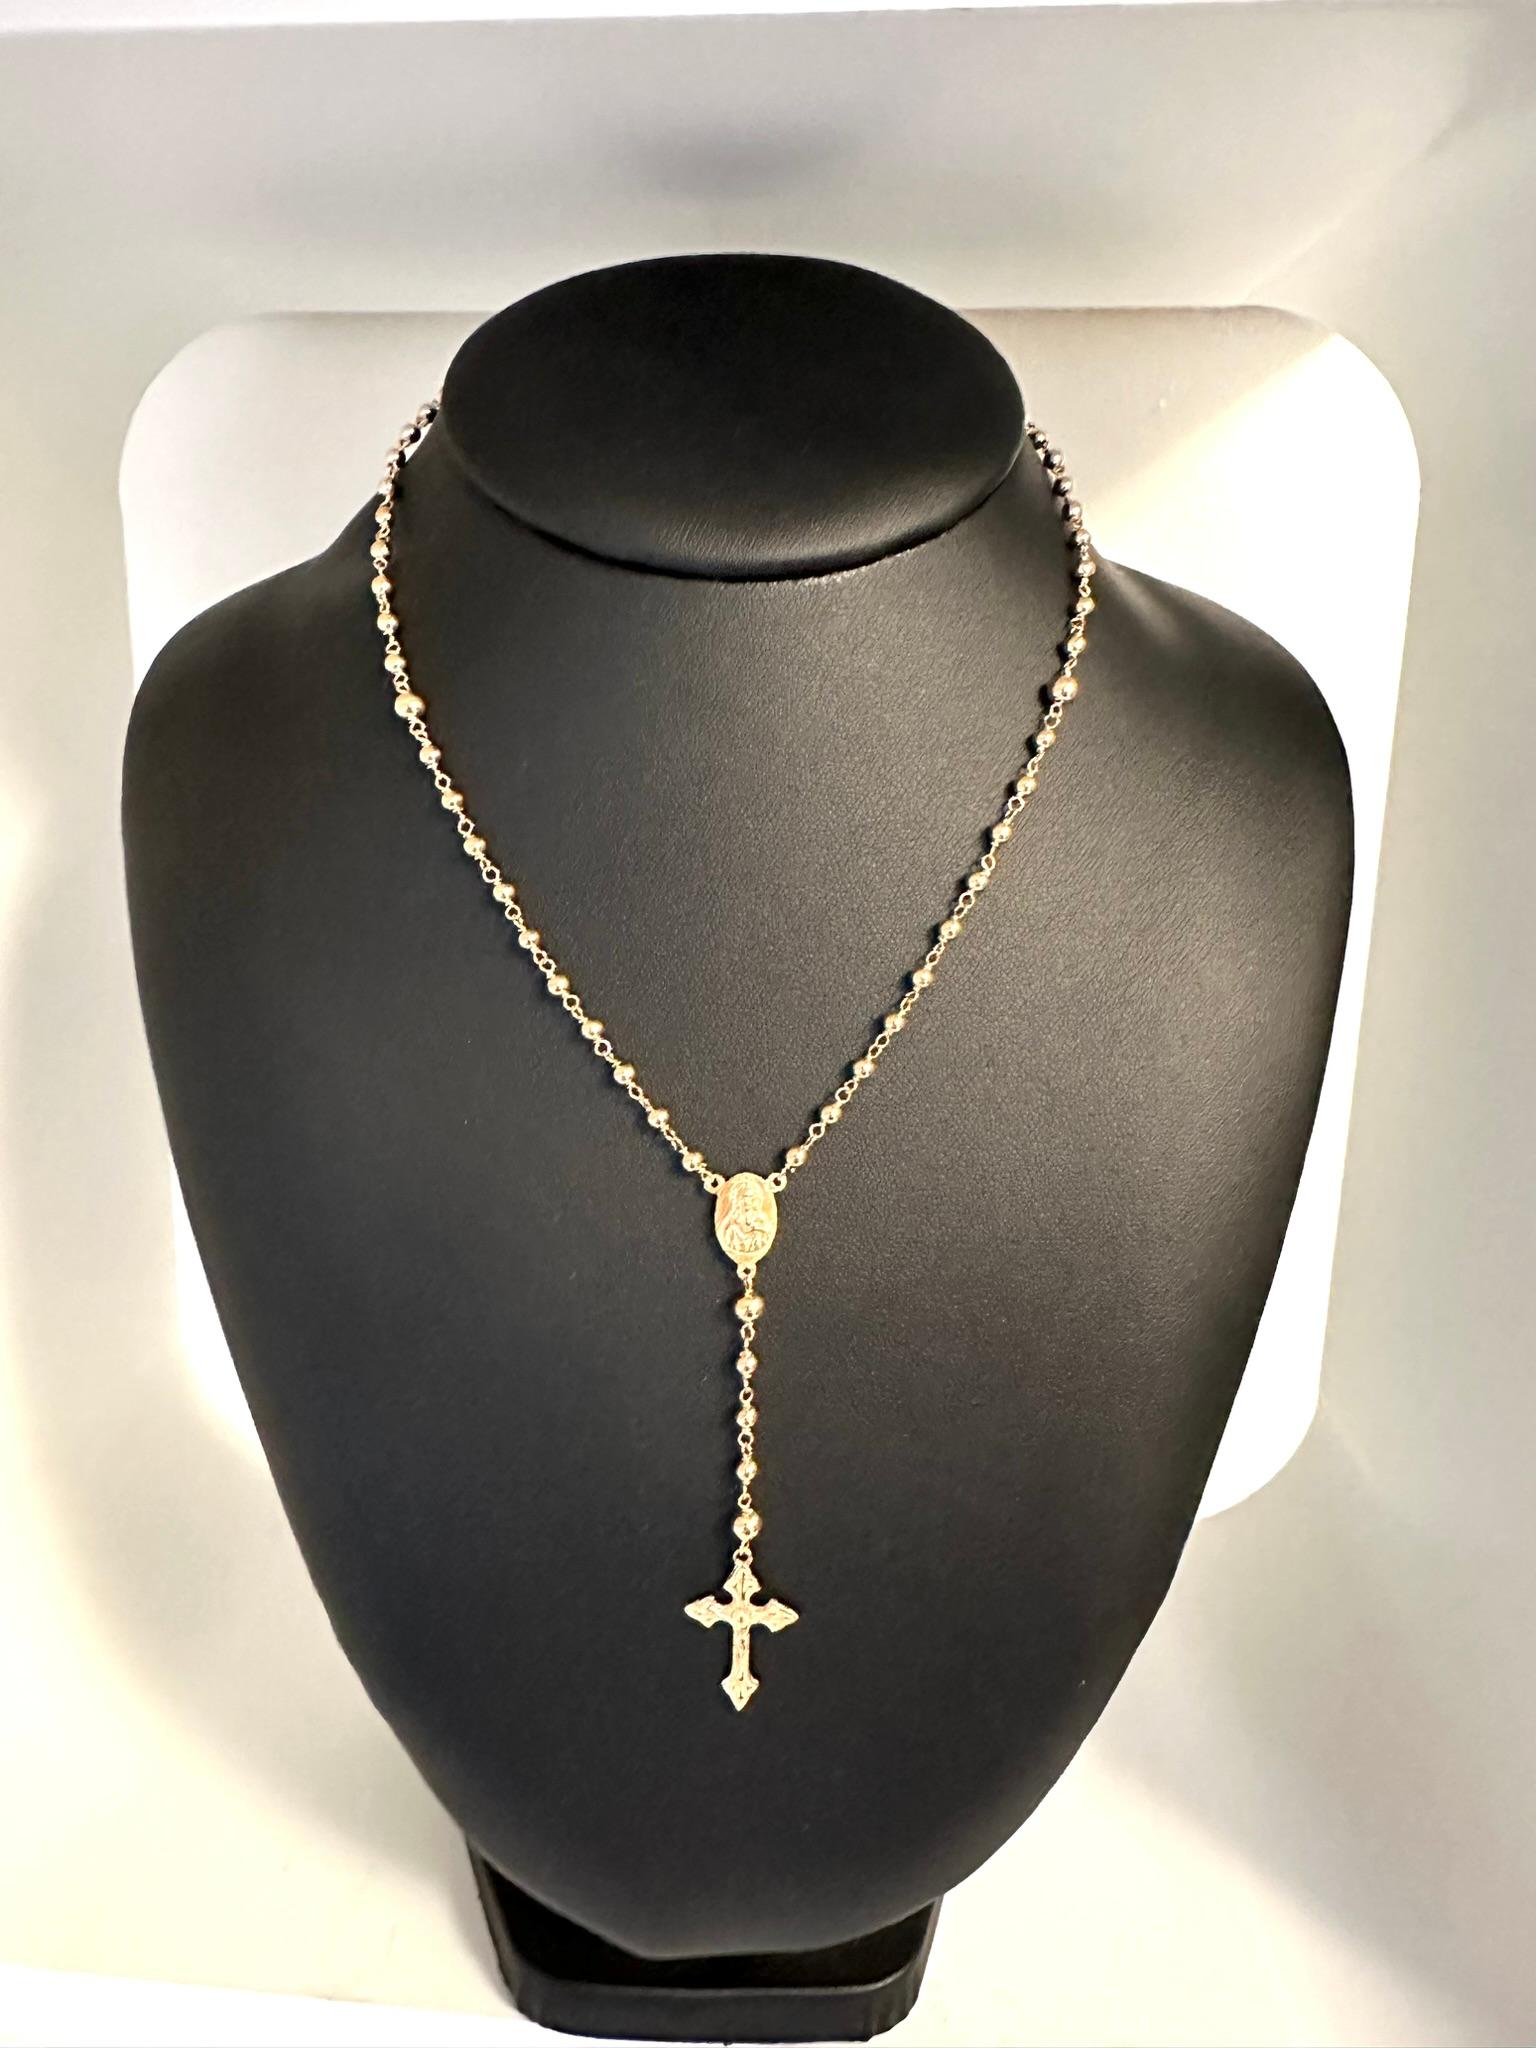 The Vintage Portuguese Rosary in 19 karat Yellow Gold from Fatima is a remarkable religious artifact that holds both cultural and spiritual significance. Originating from Fatima, a renowned pilgrimage site in Portugal, this rosary carries with it a